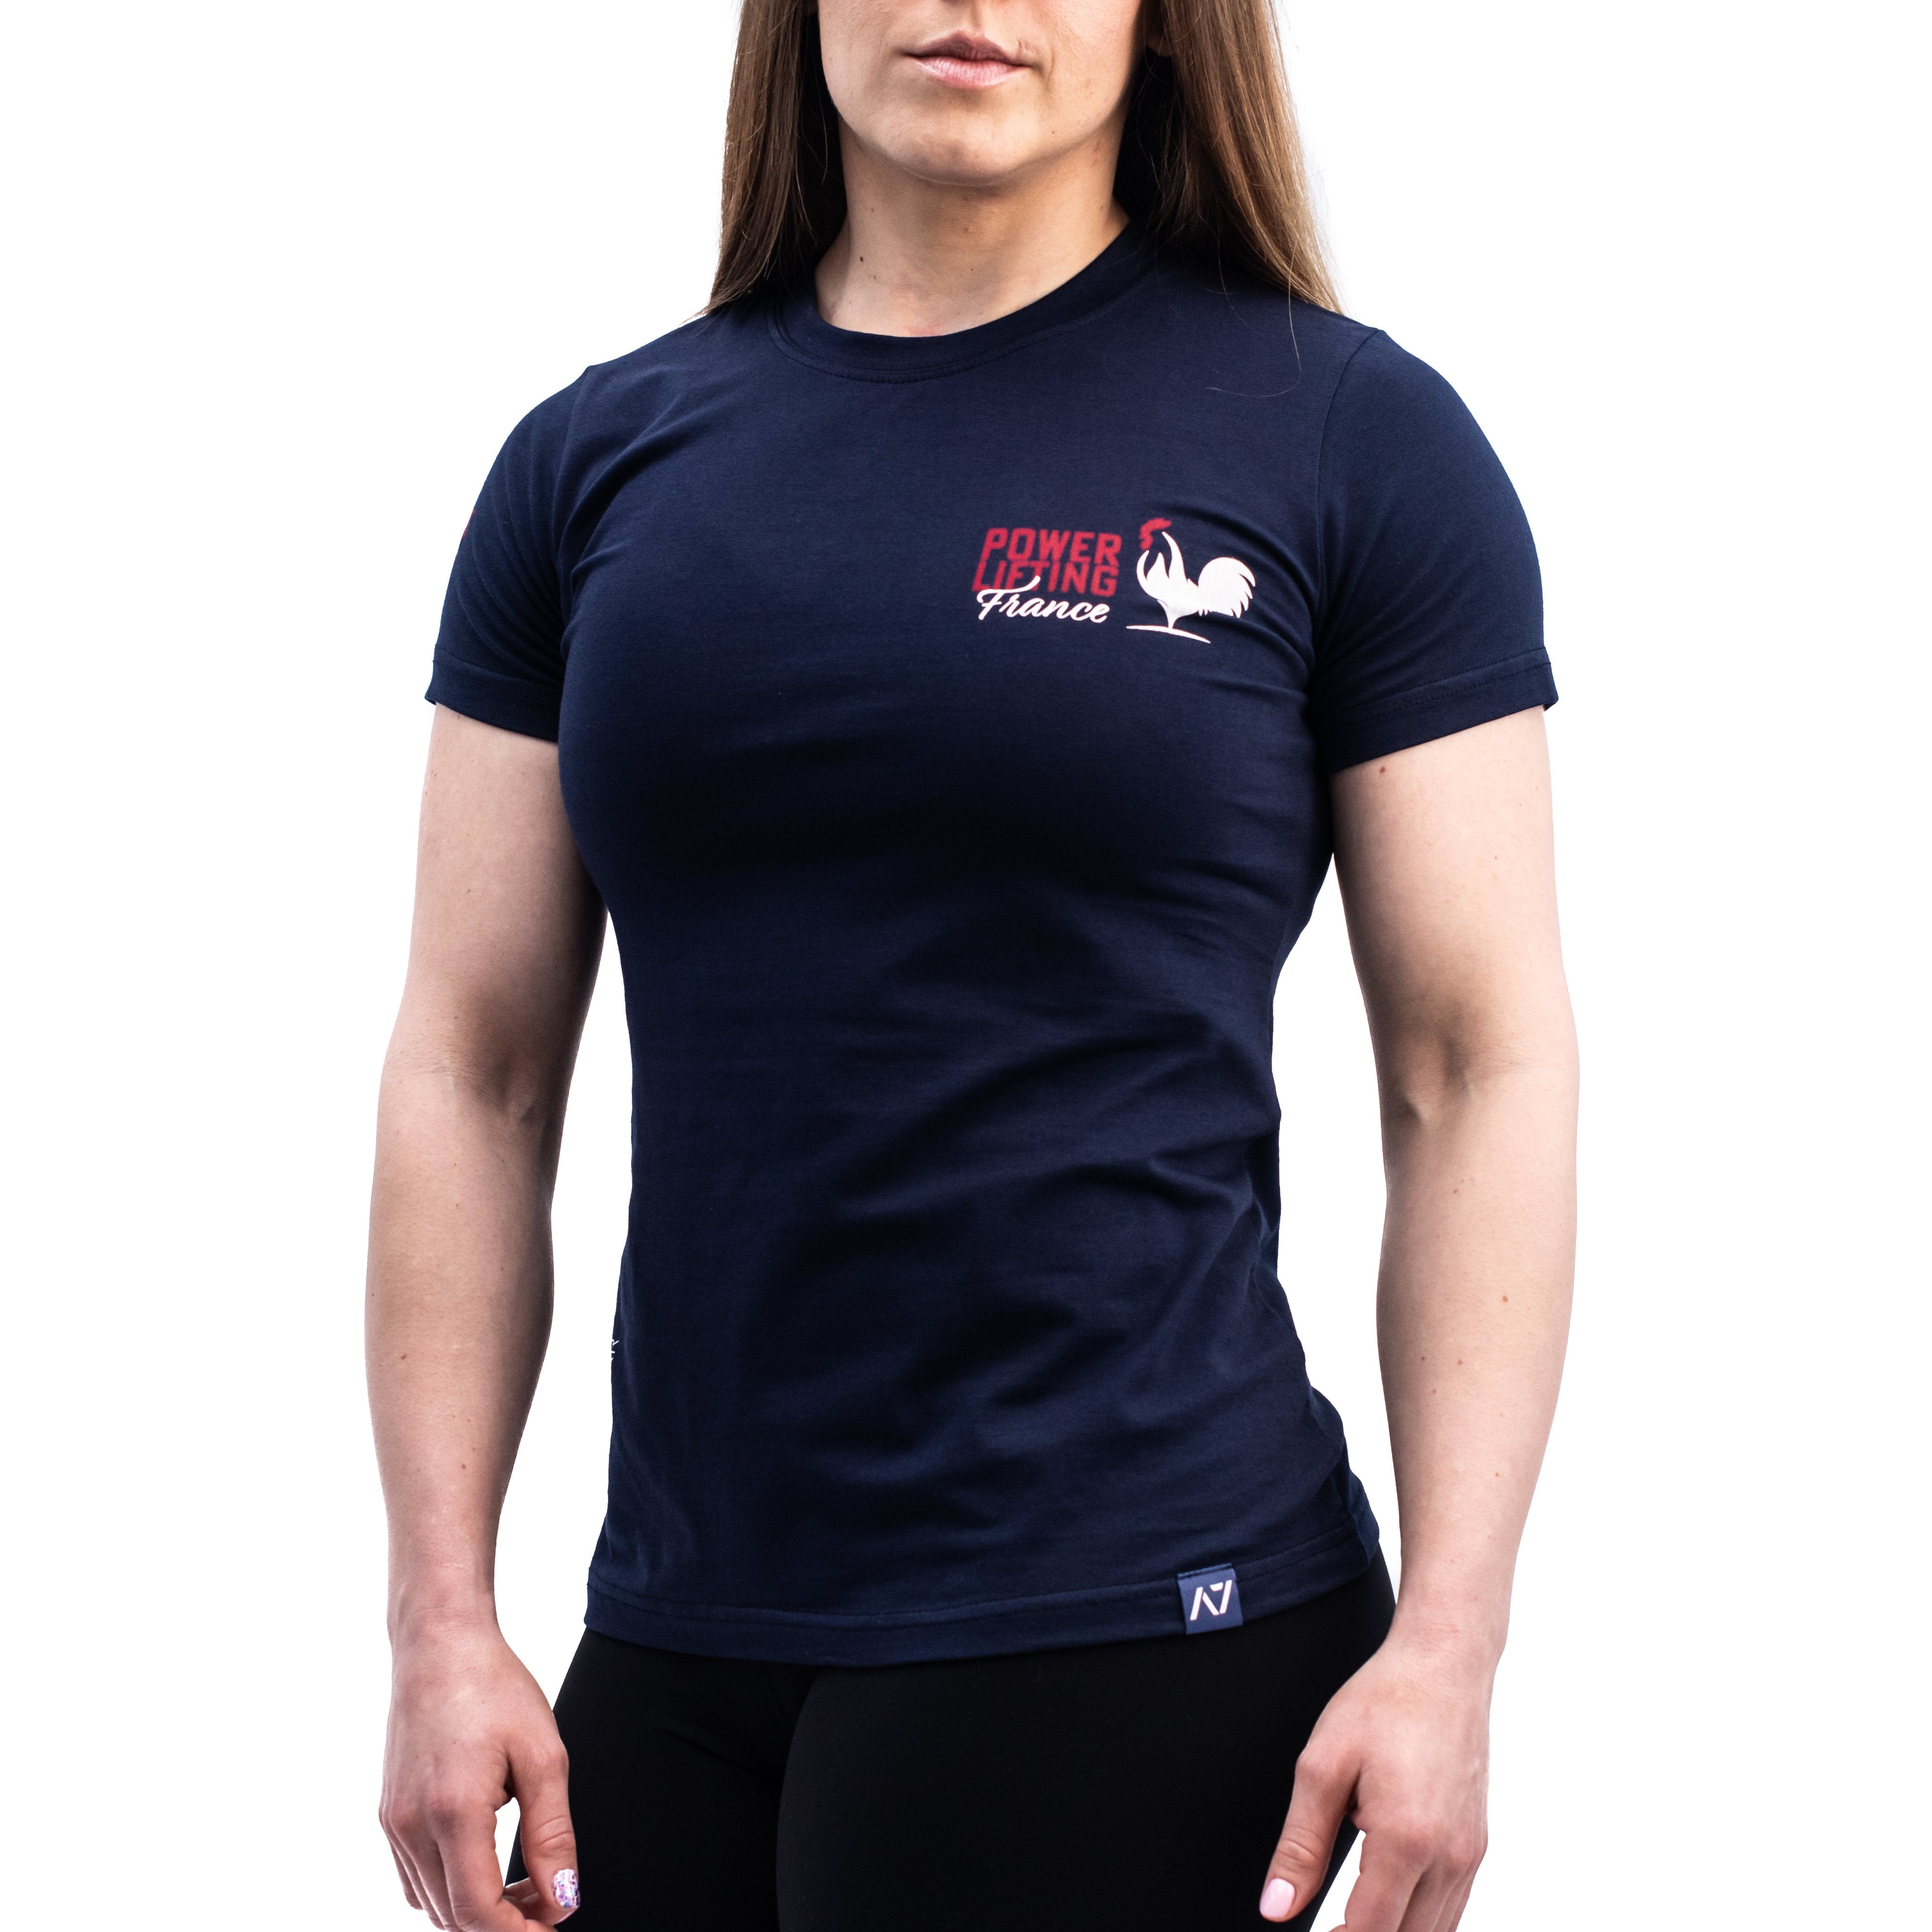 Powerlifting France Bar Grip T-shirt, great as a squat shirt. Purchase Powerlifting France Bar Grip tshirt UK from A7 UK. Purchase Powerlifting France Bar Grip Shirt in Europe from A7 UK. No more chalk and no more sliding. Best Bar Grip Tshirts, shipping to UK and Europe from A7 UK. Powerlifting France is our classic black on black shirt design! The best Powerlifting apparel for all your workouts. Available in UK and Europe including France, Italy, Germany, Sweden and Poland